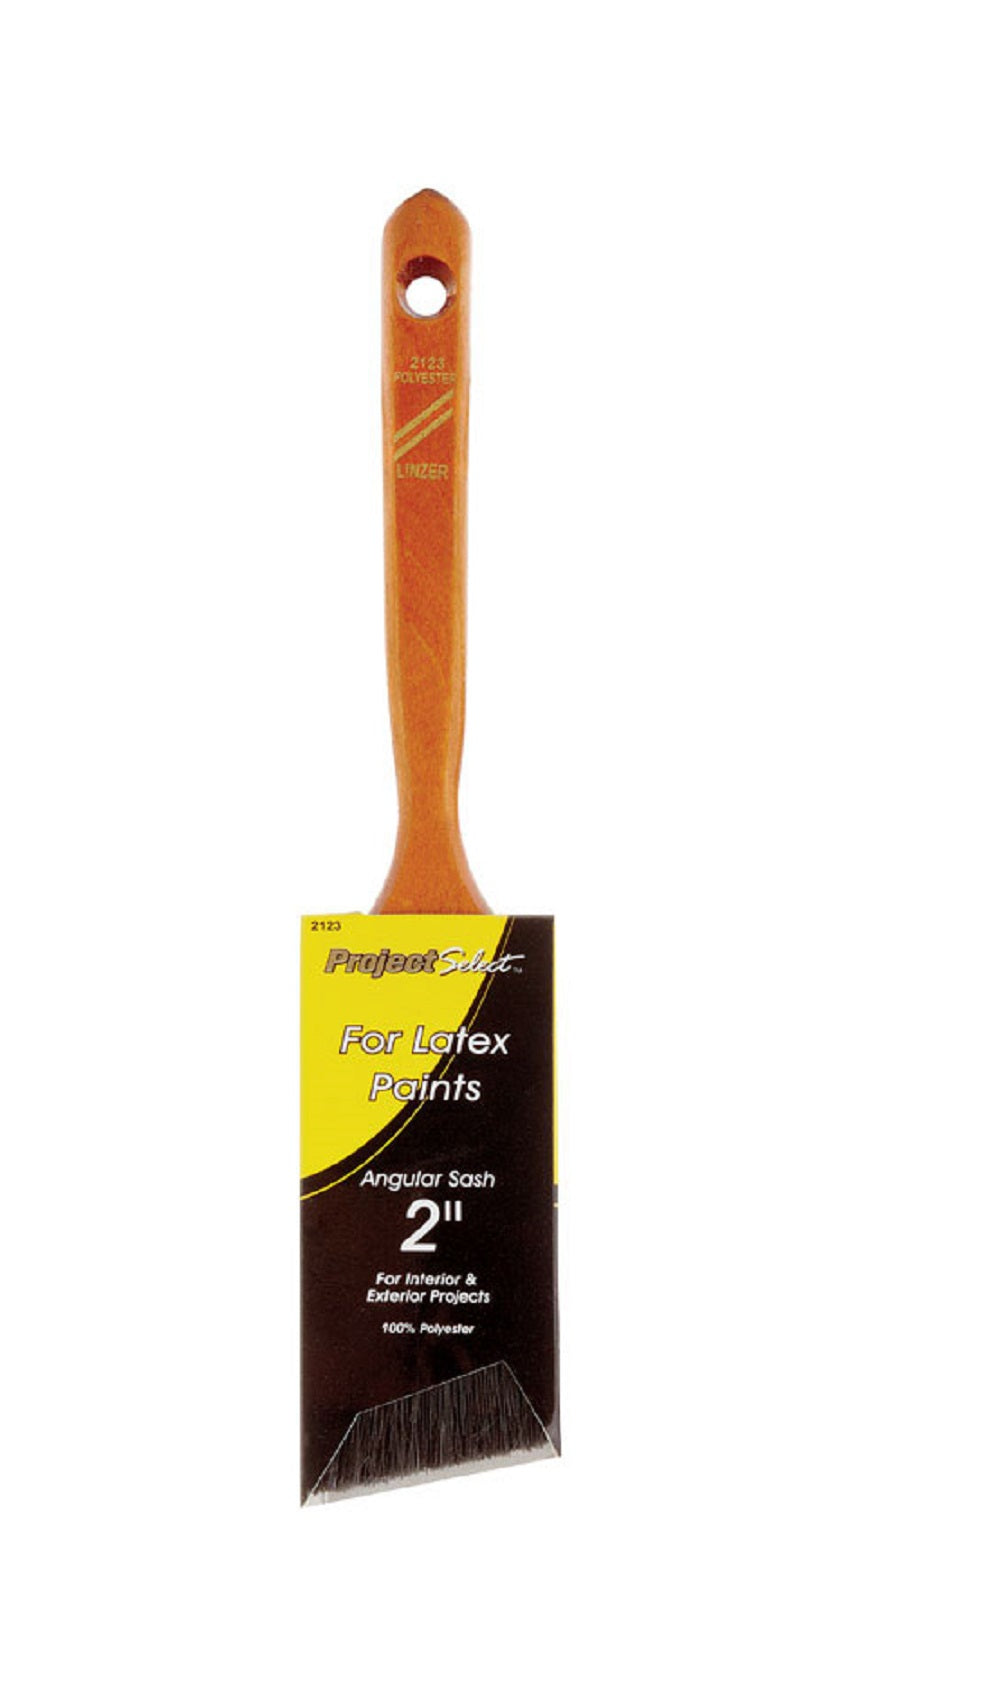 Linzer 2123-2 Medalist Angled Paint Brush, 2"